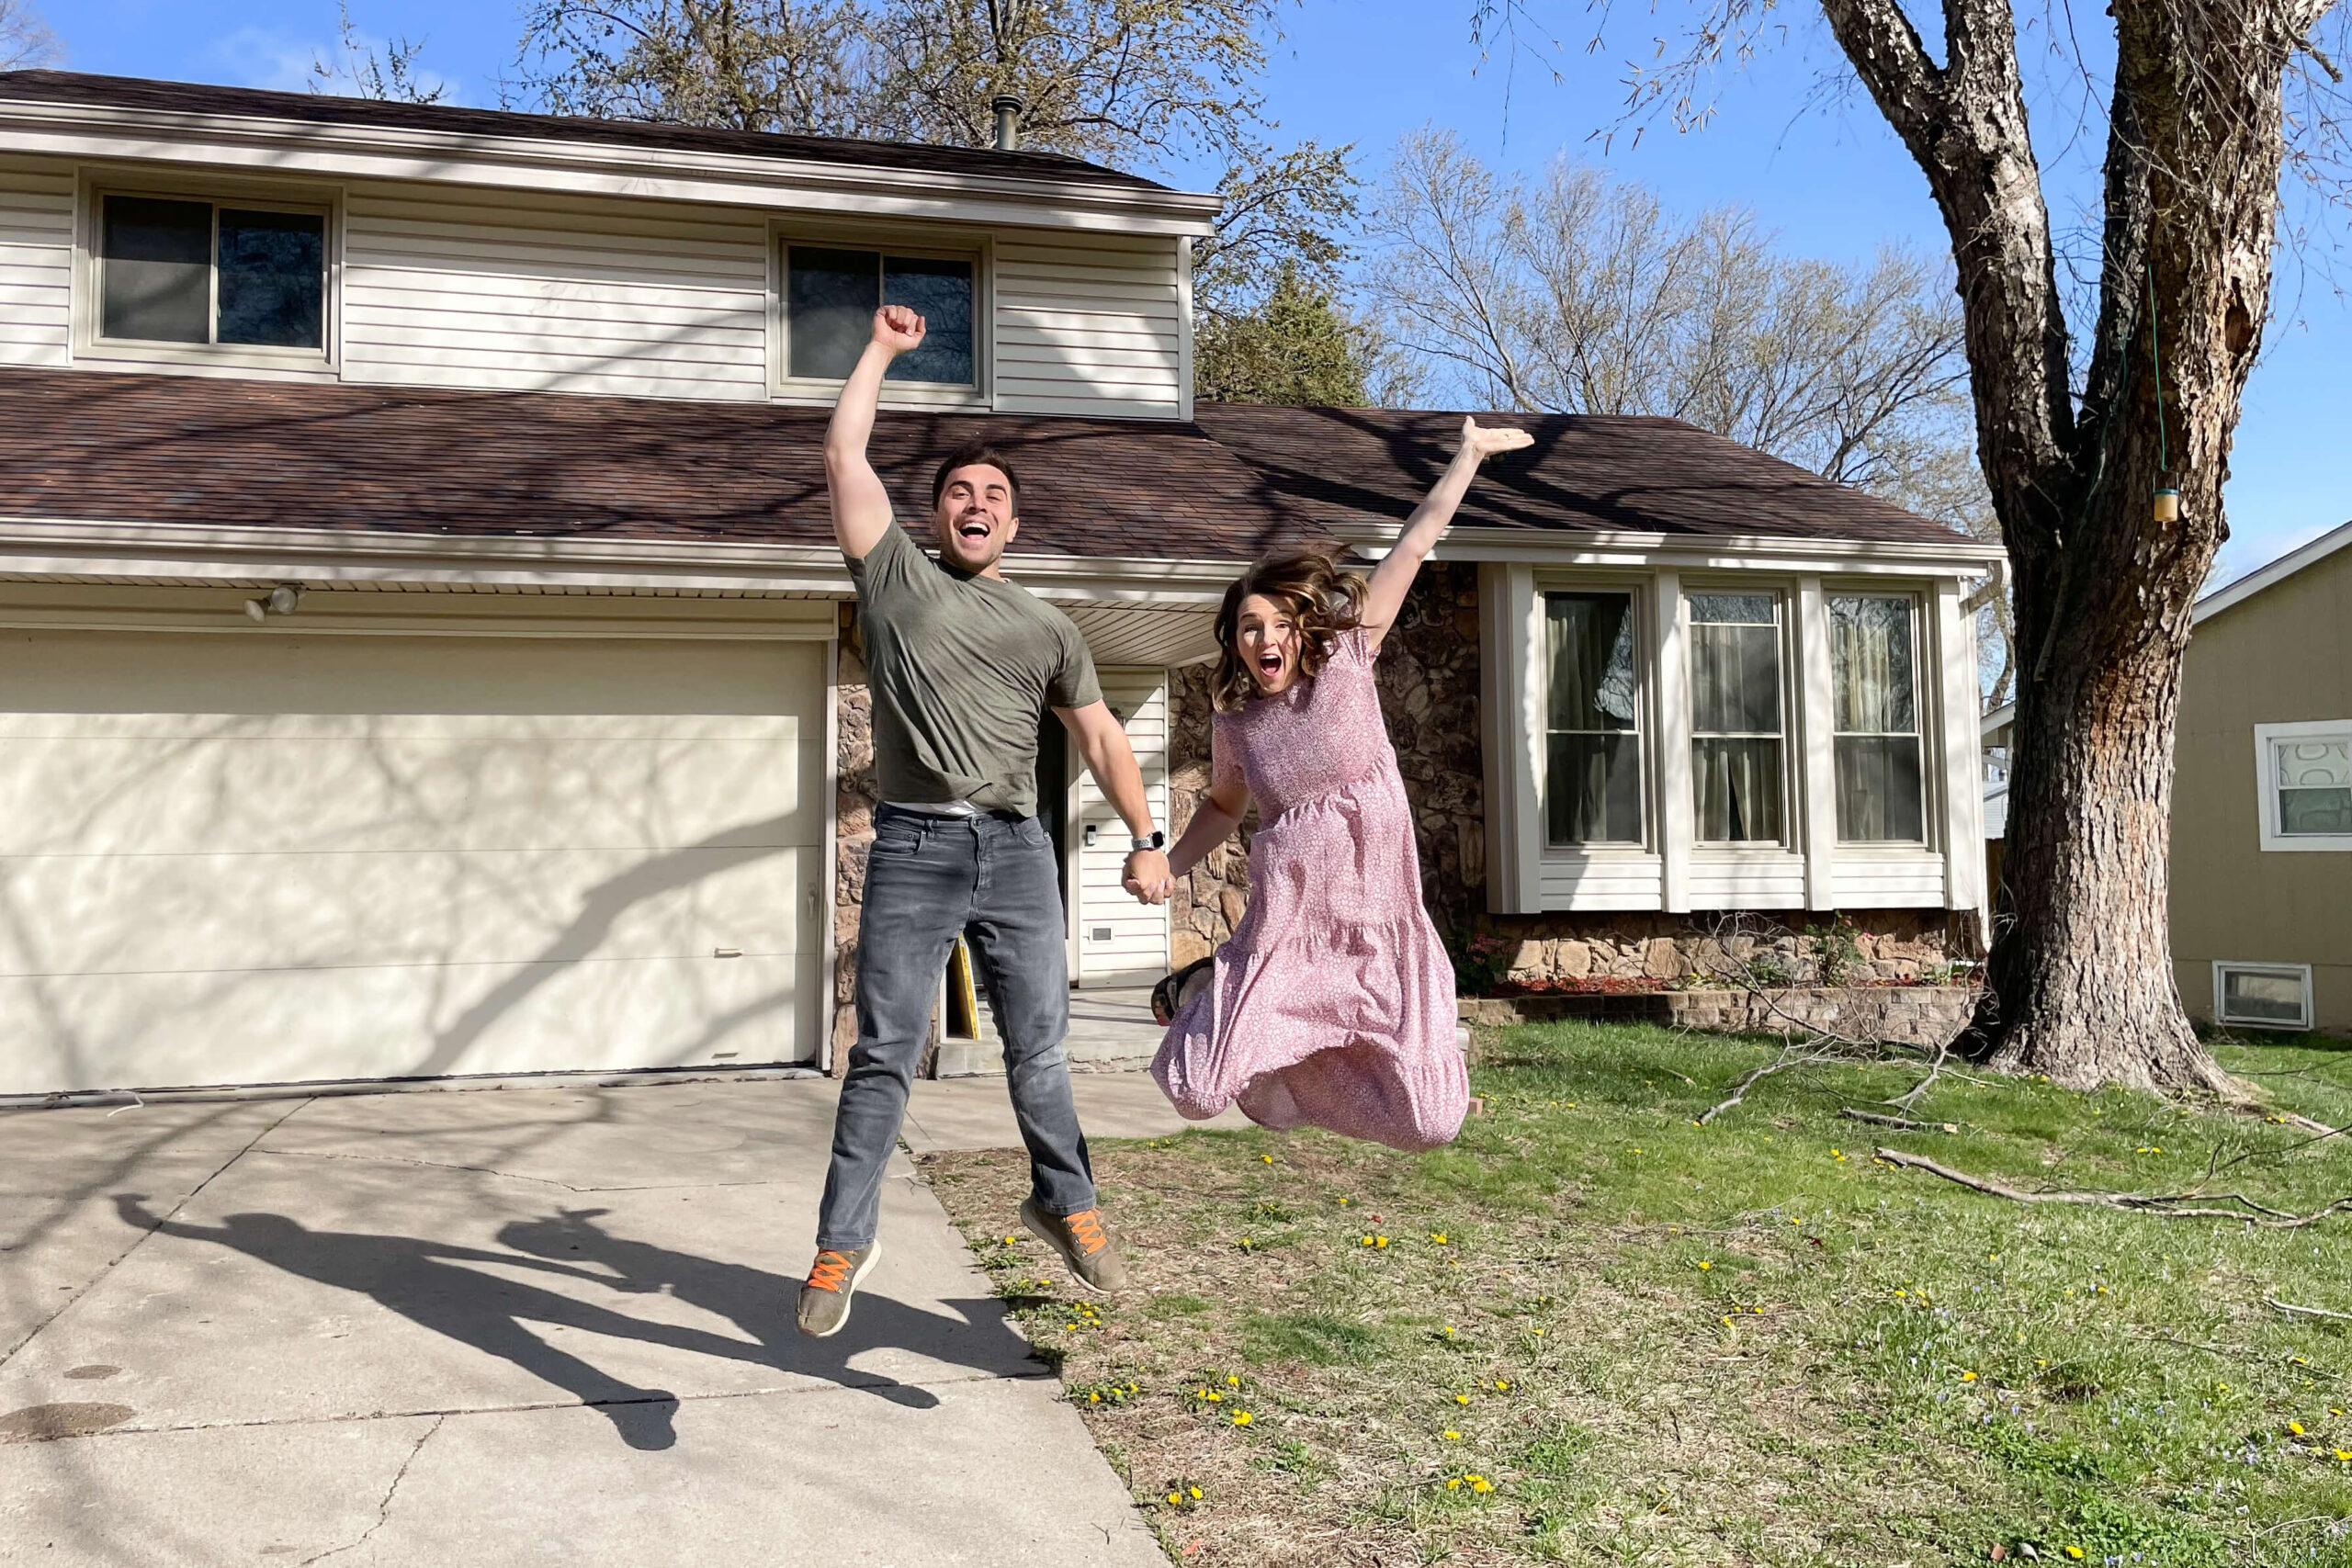 New homeowners jumping up excited in front of the fixer upper they purchased.